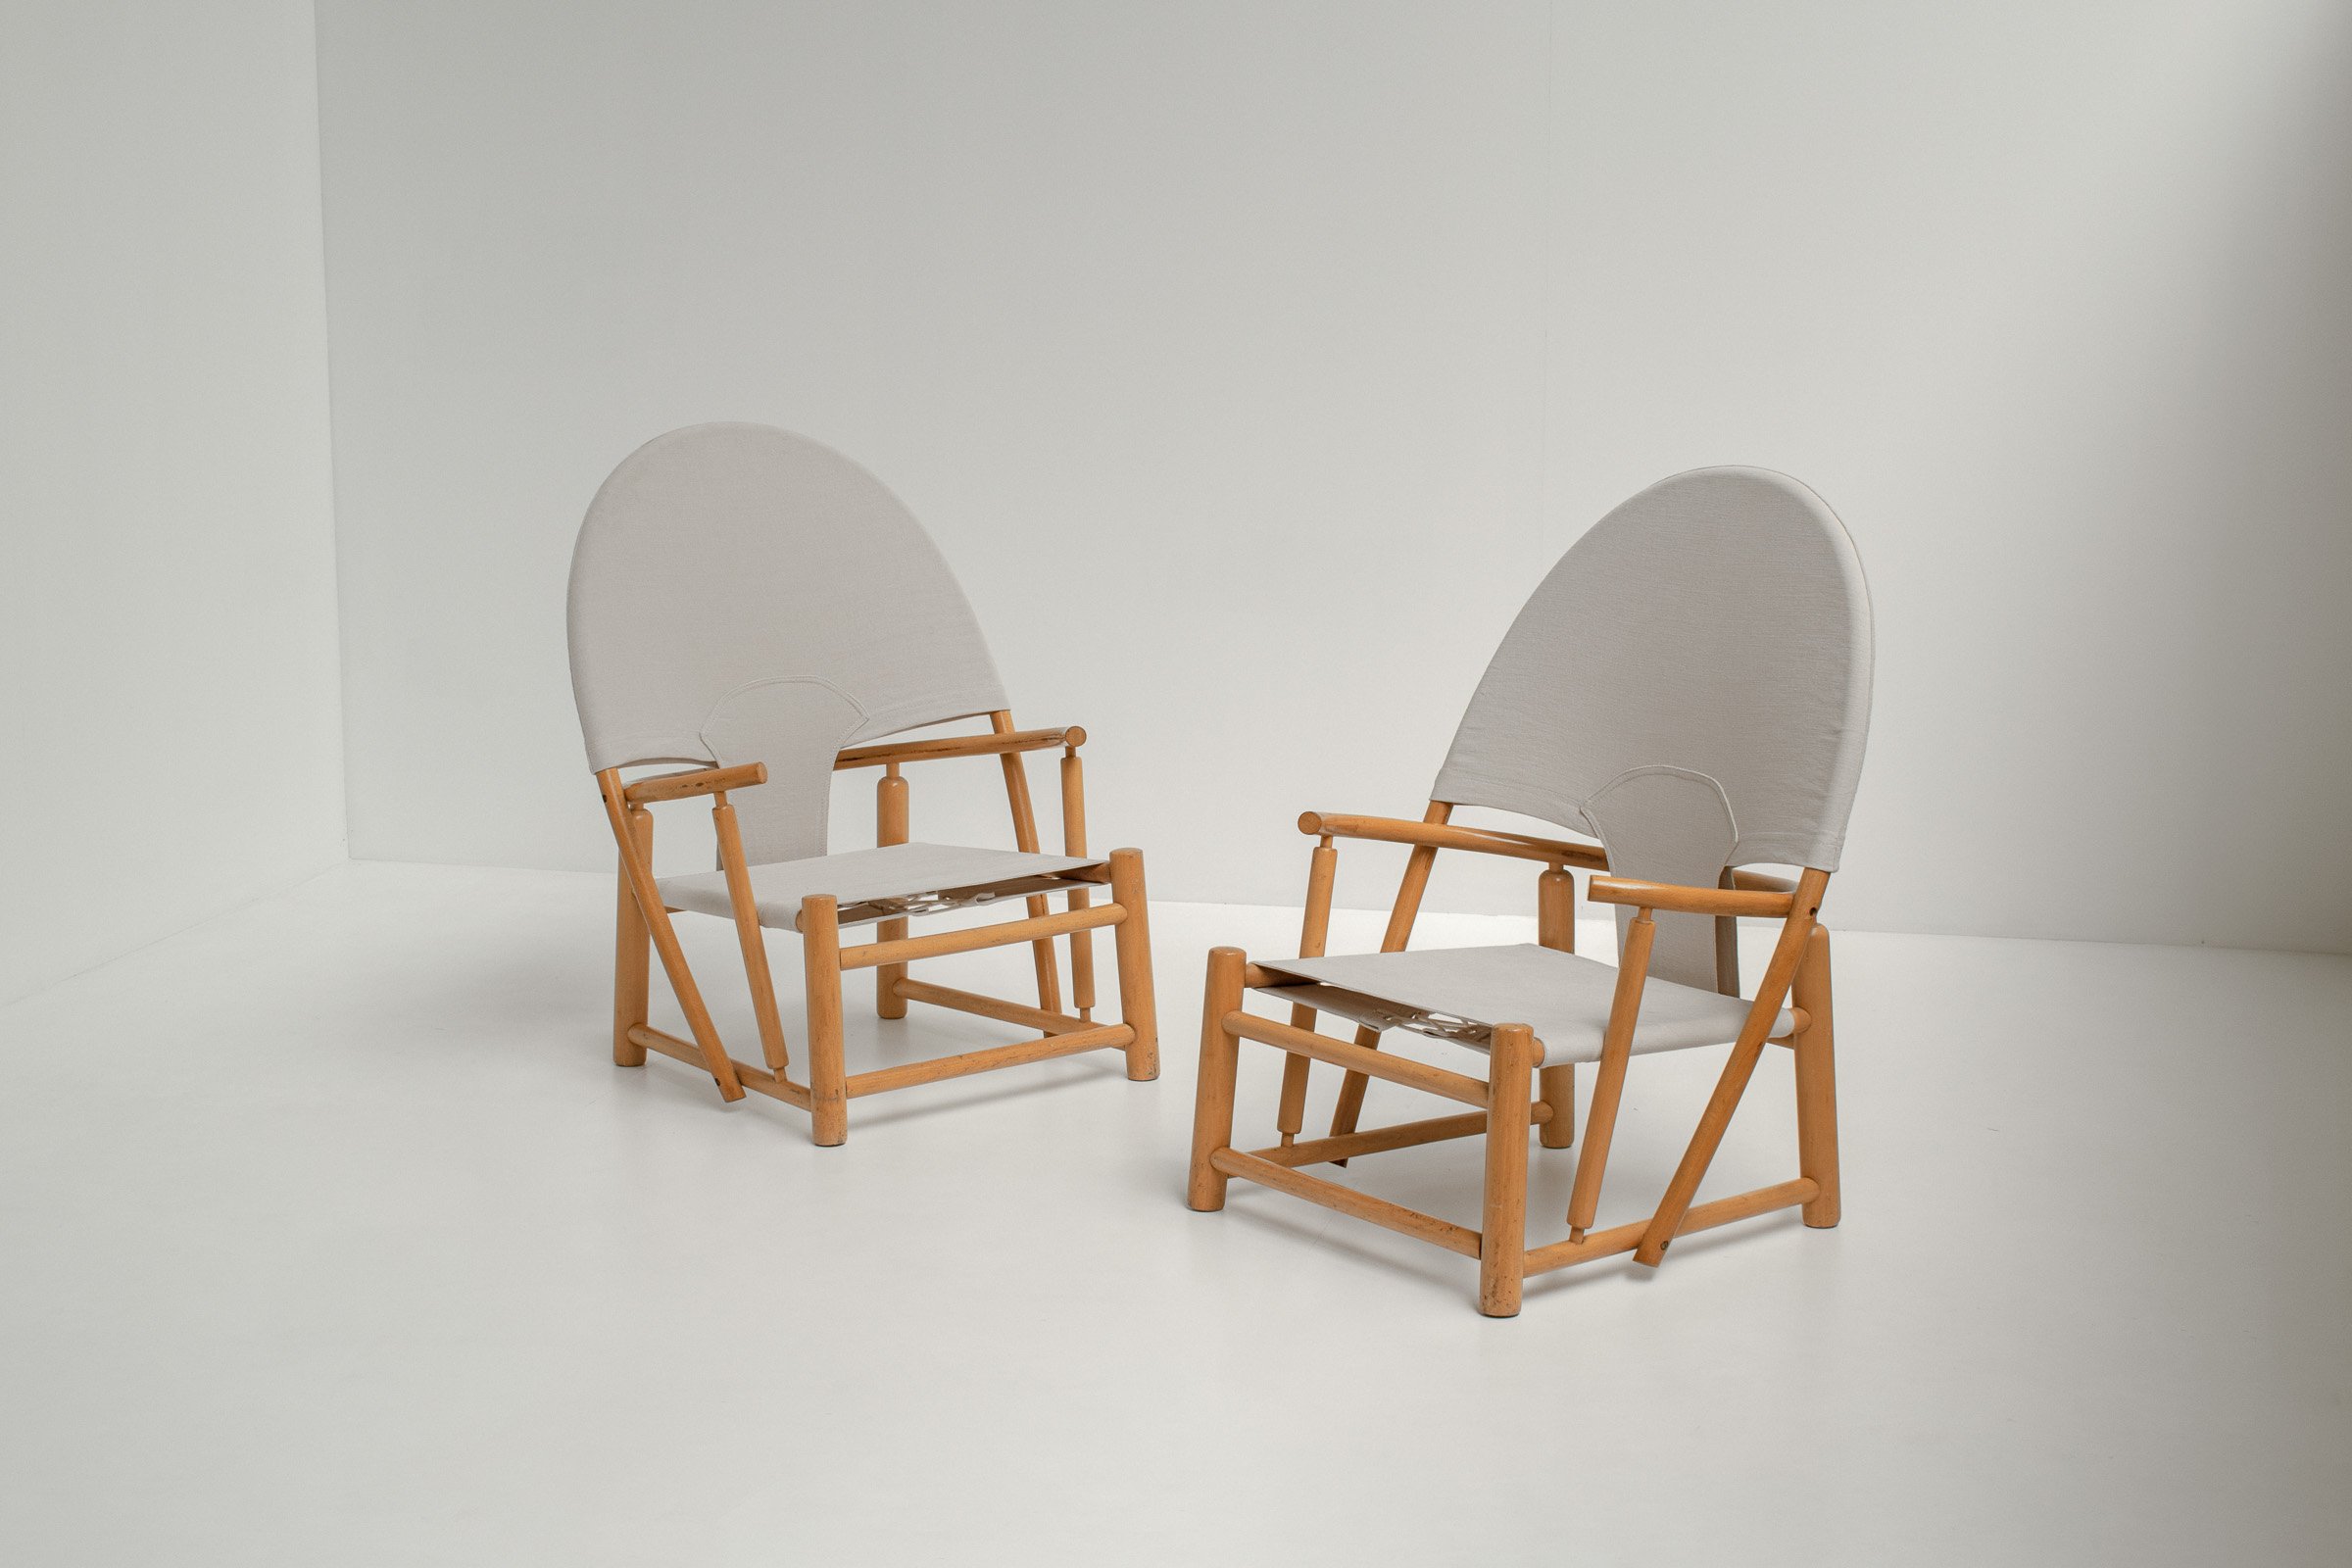 DADDY for Piero Hoop Palange Toffoloni by G23 Werther DECO Germa of Chairs Pair & —